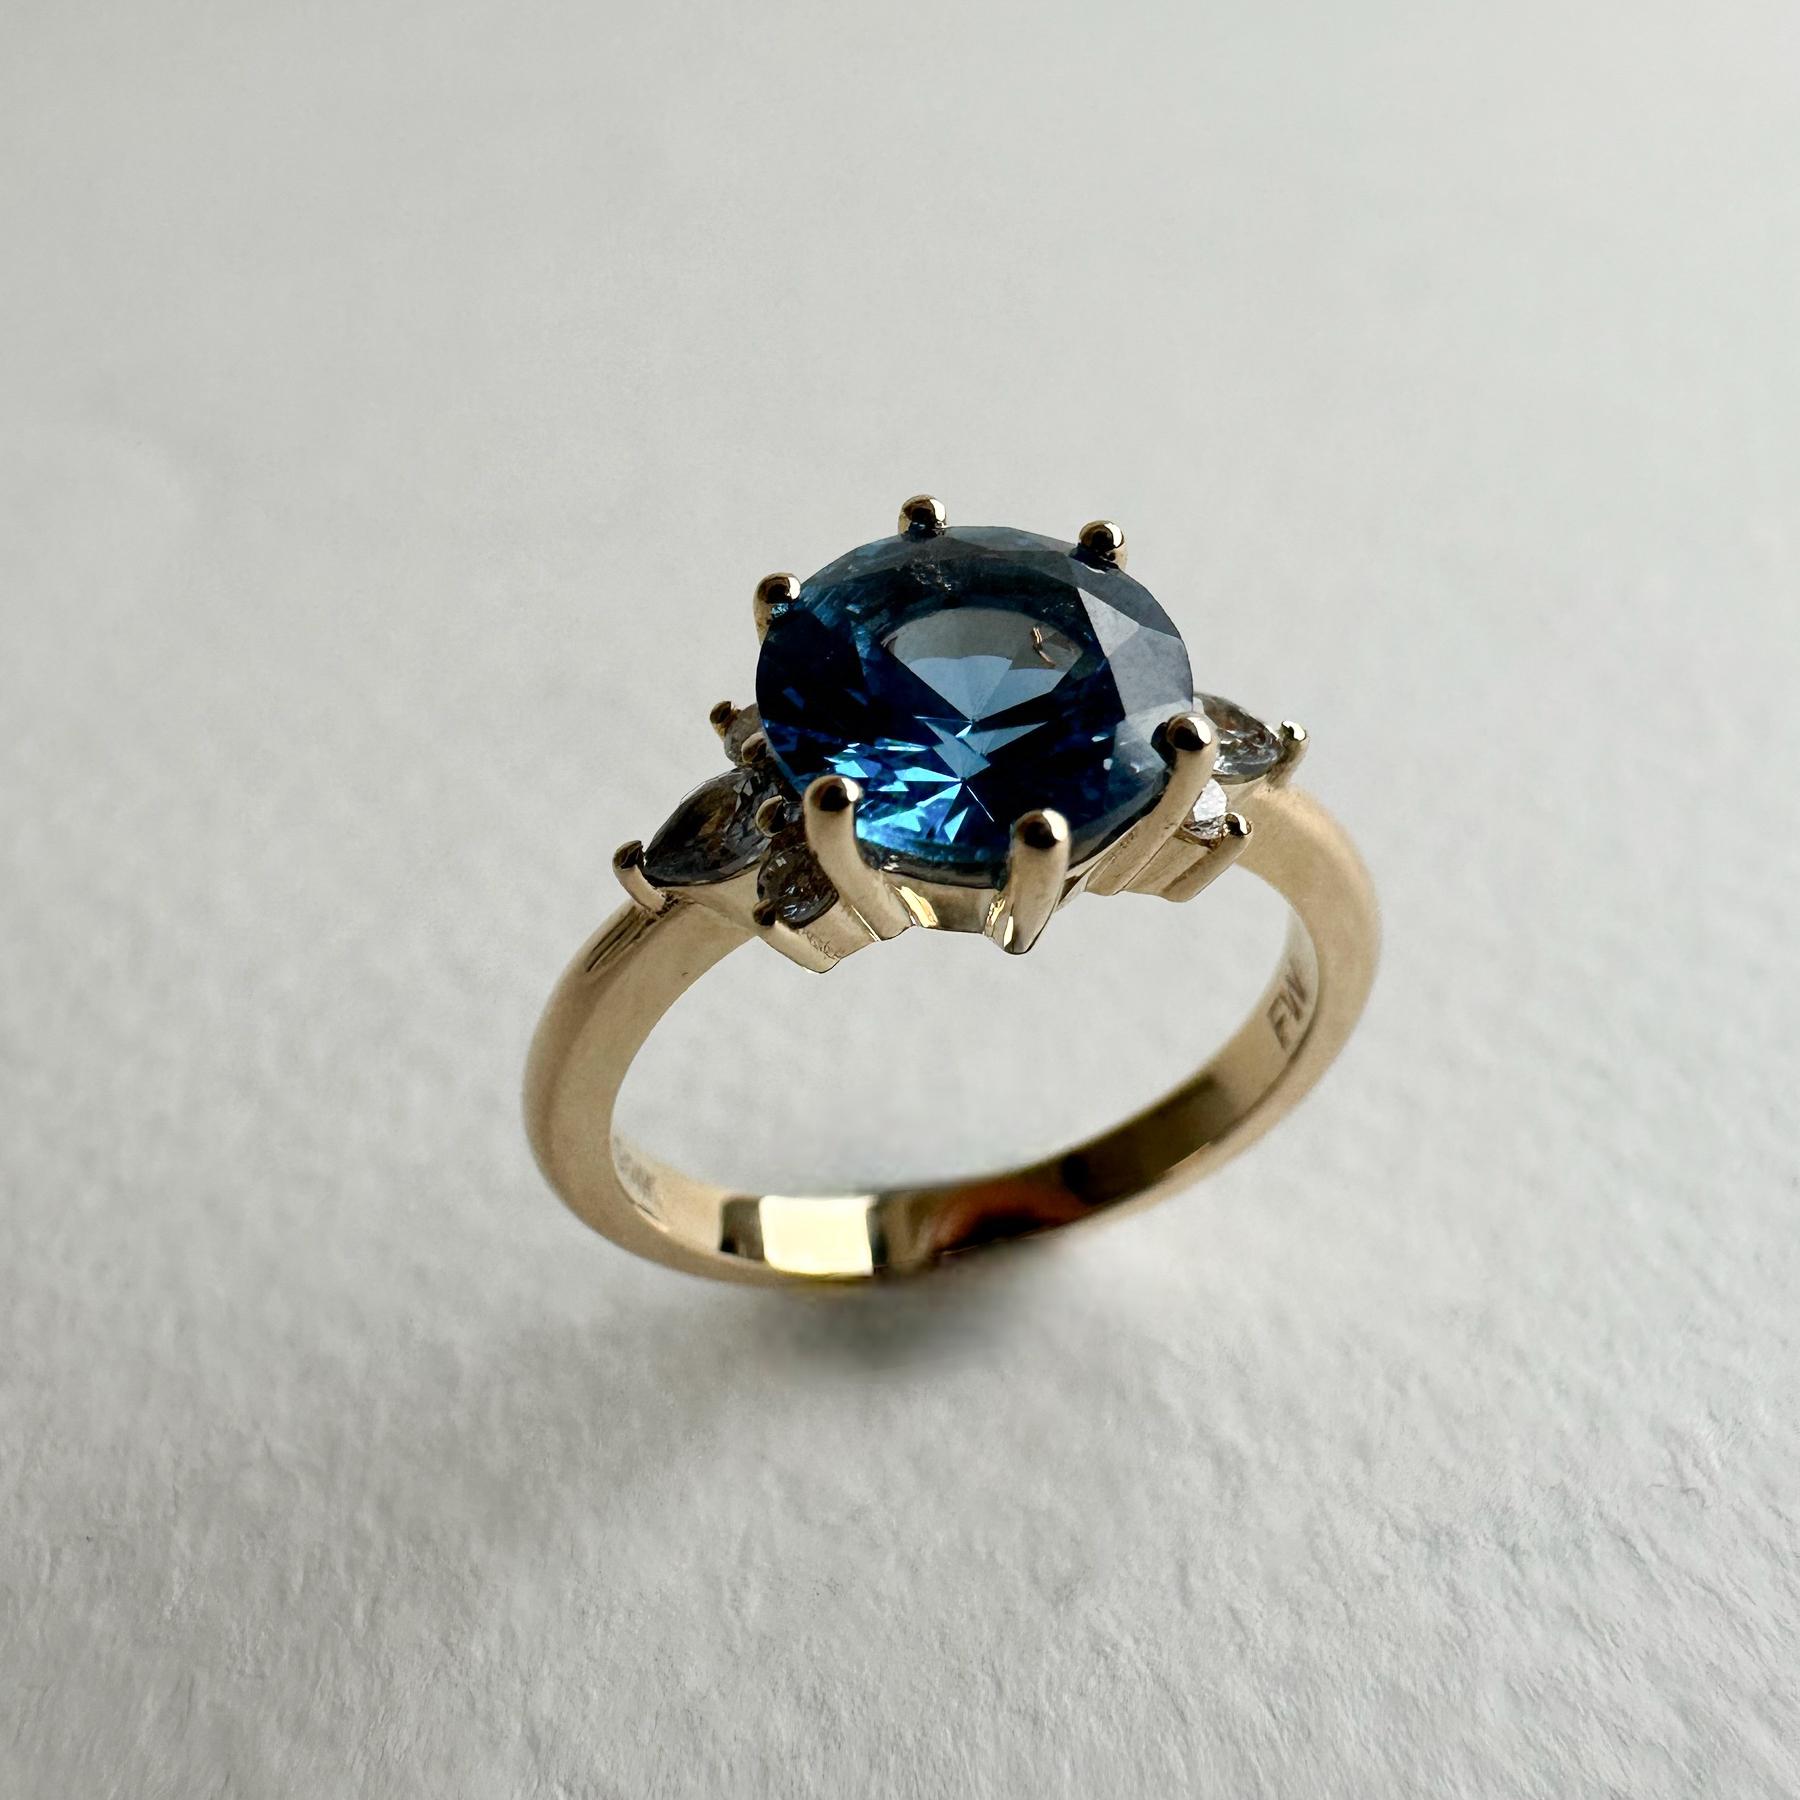 2 carat equivalent blue sapphire engagement ring featuring six accenting diamonds in a 14K yellow gold ring.